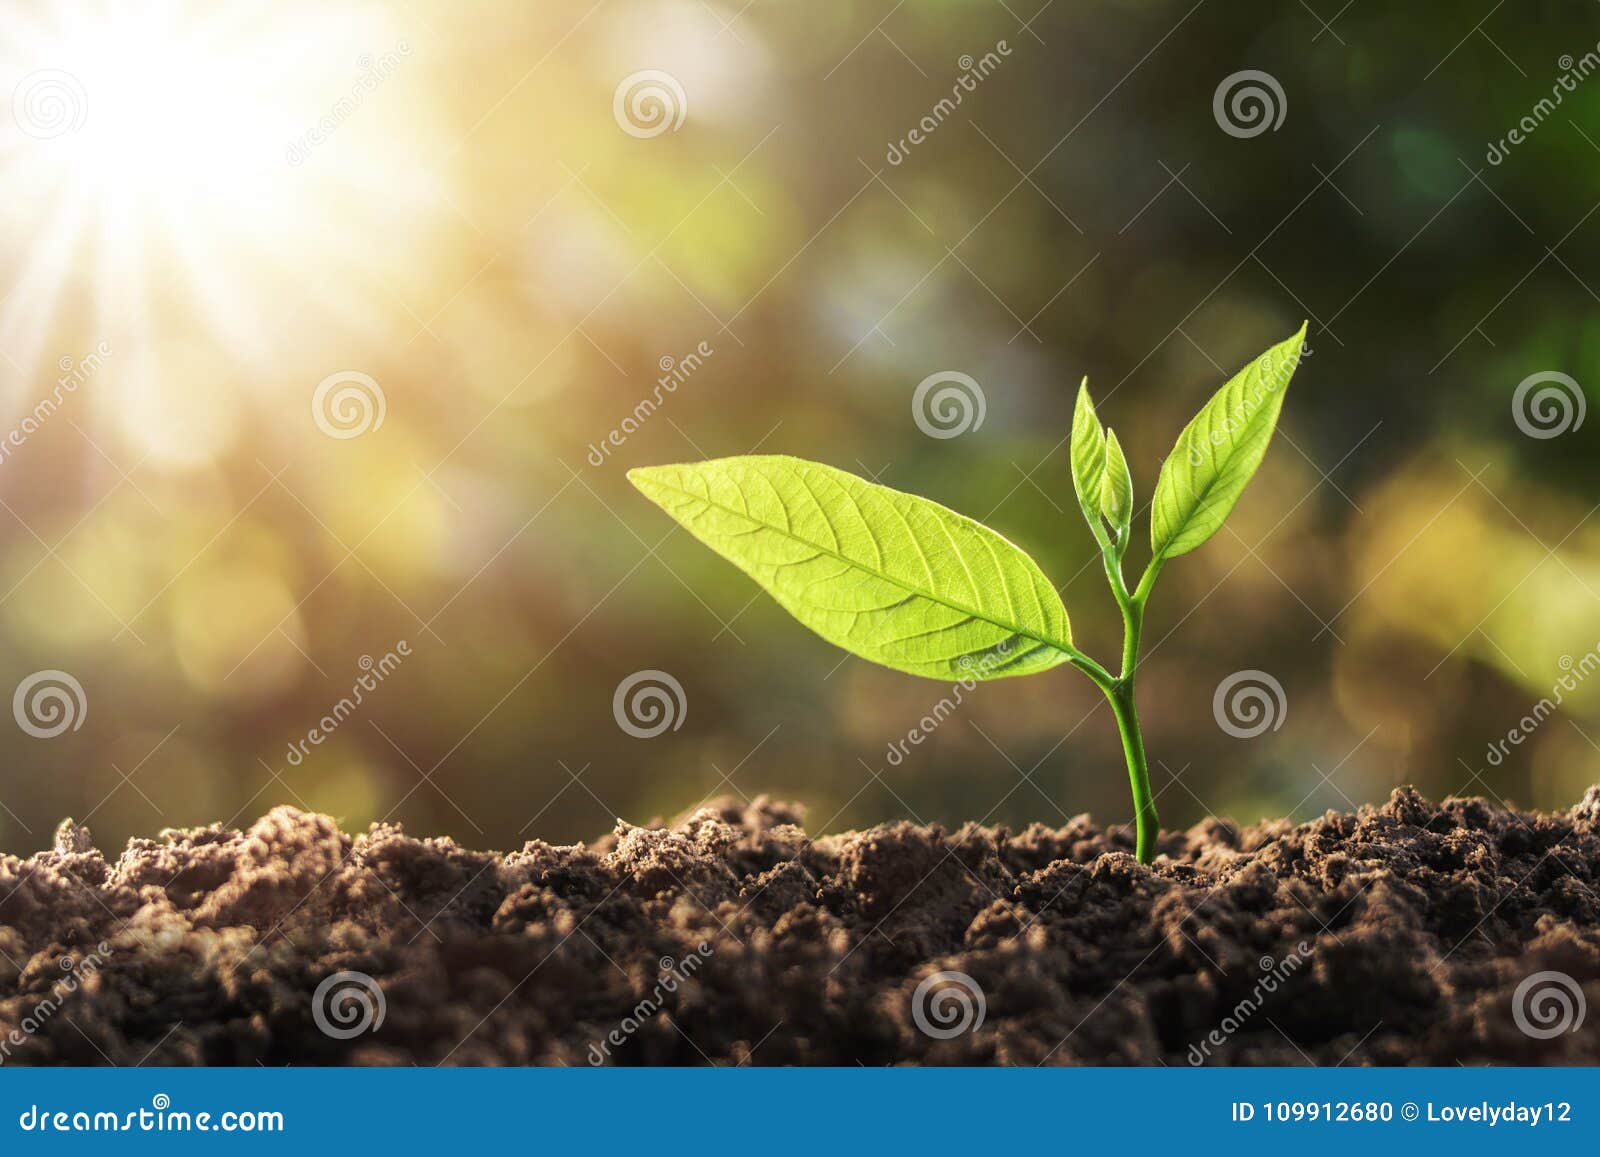 young plant growing with sun light